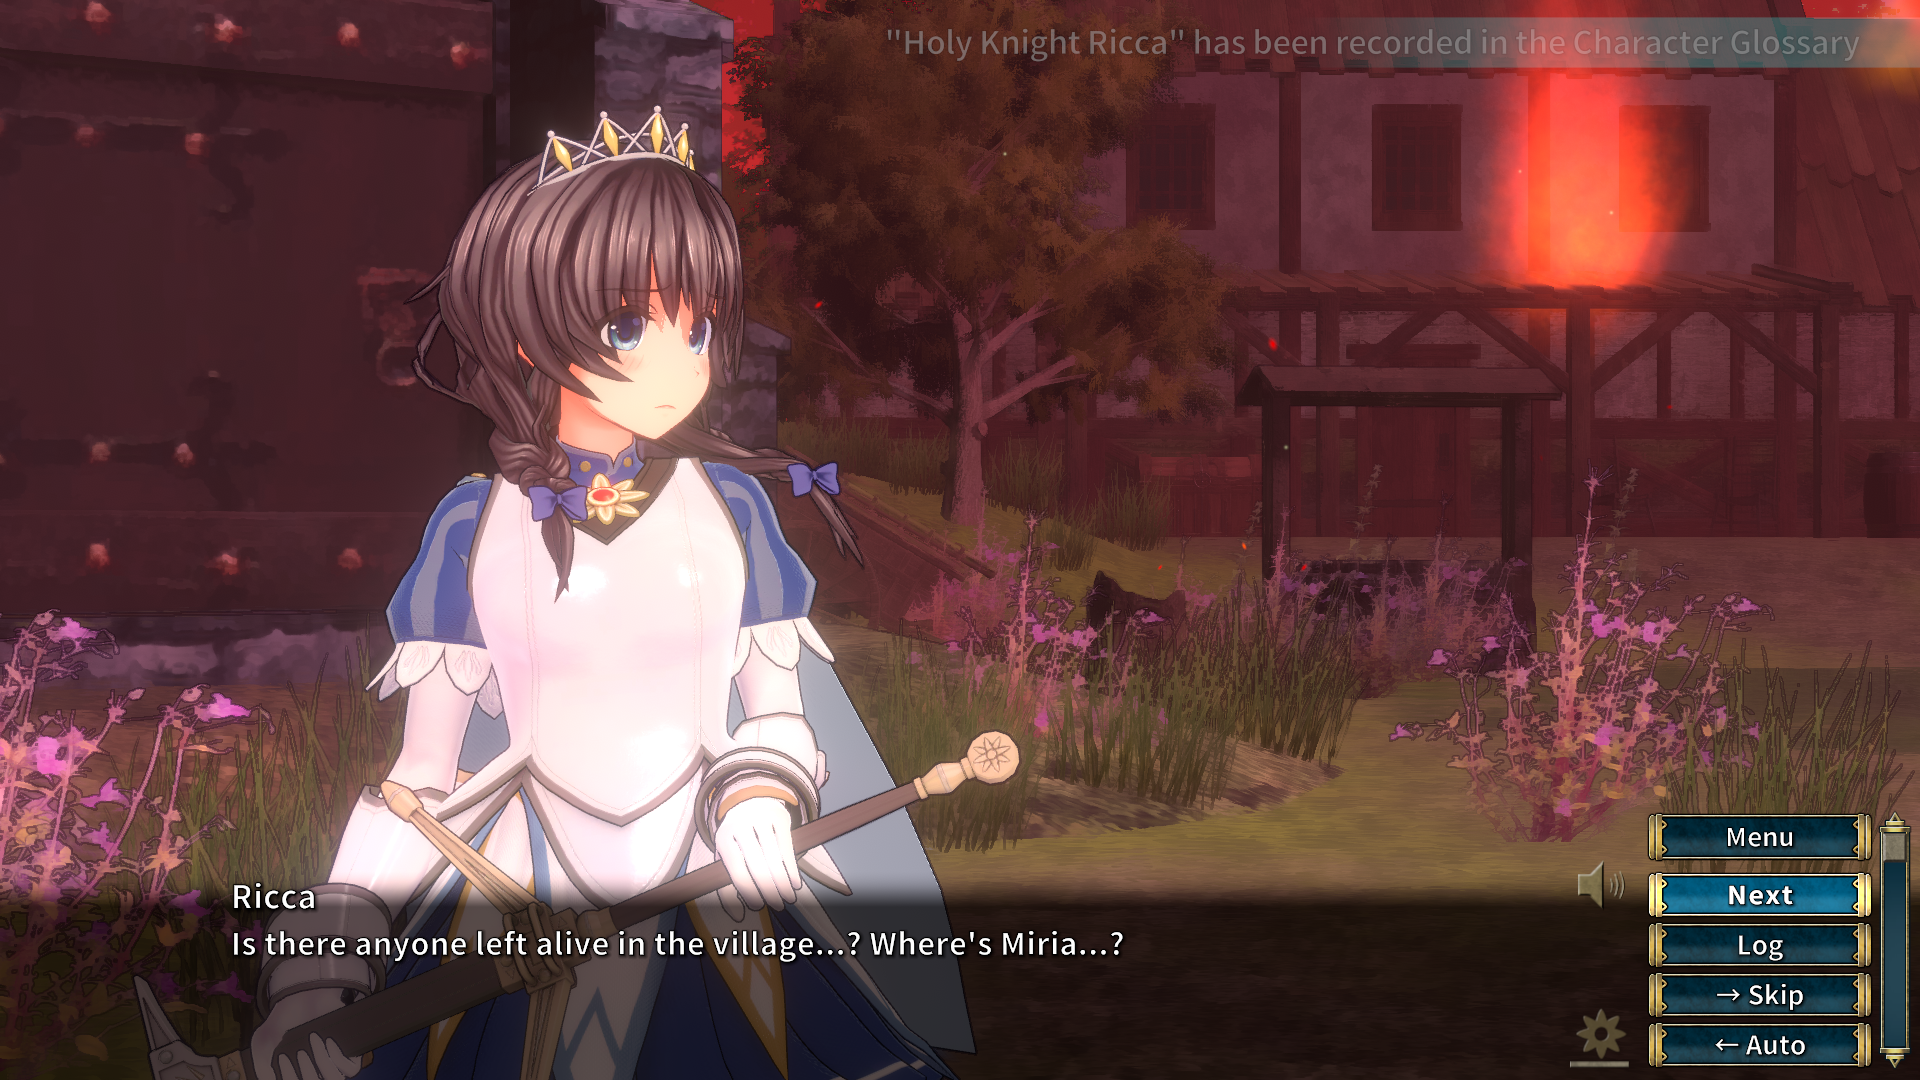 Holly Knight Ricca. The Fairy Tale of Holy Knight Ricca: two Winged sisters. The Fairy Tale of Holy Knight Ricca. The Fairy Tale of Holy Knight Ricca: two Winged sisters [v1.2.2] [mogurasoft]. Holy two